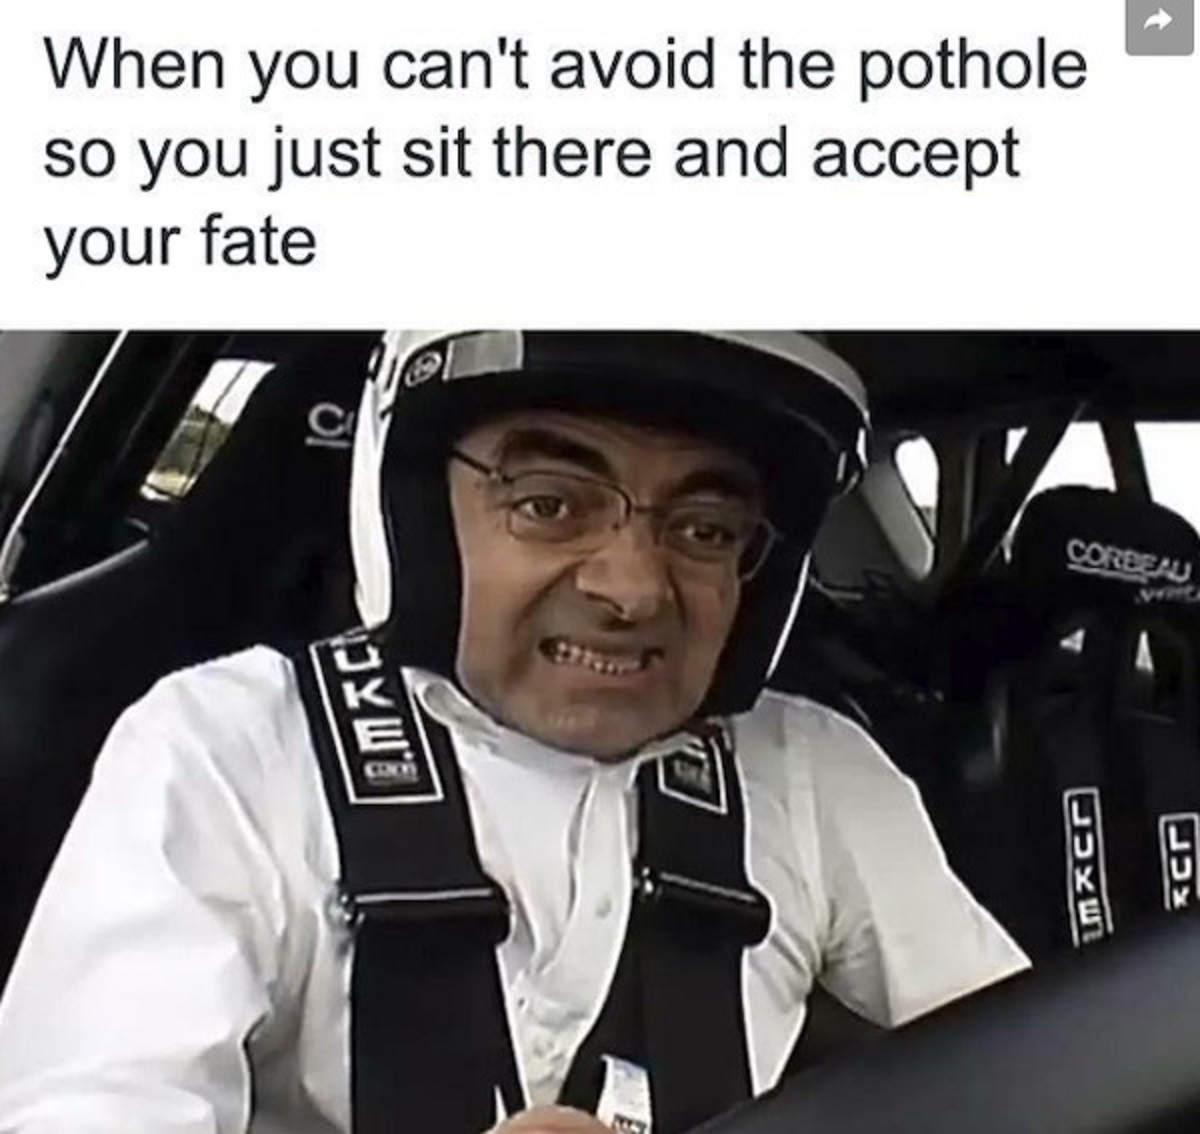 mr bean top gear - When you can't avoid the pothole so you just sit there and accept your fate C Corbeau Luke Lux